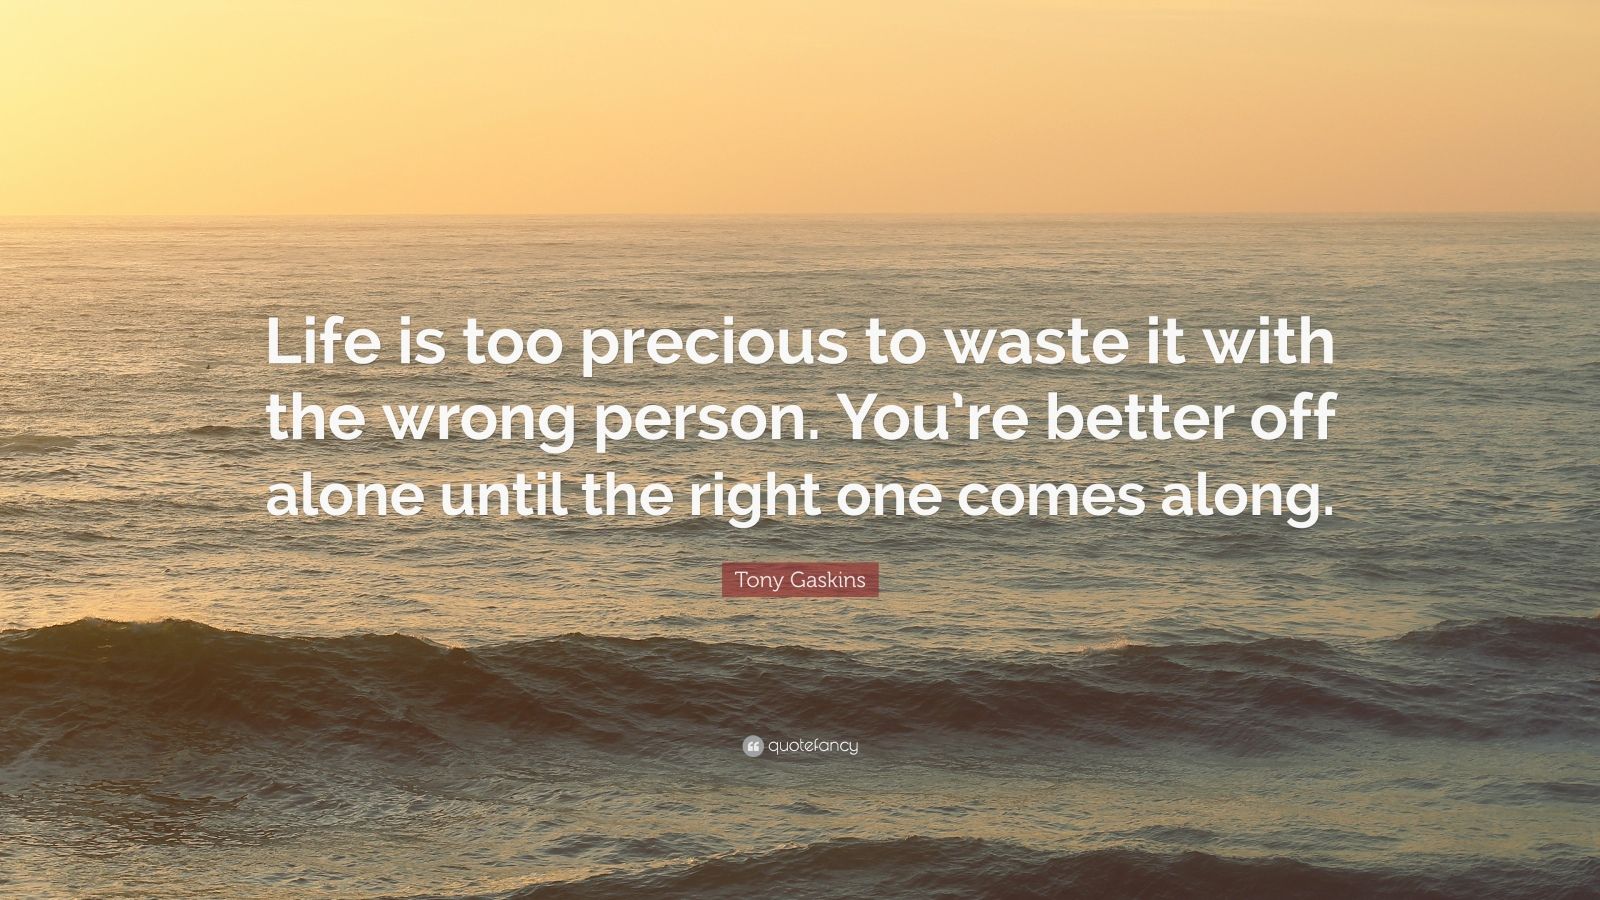 Tony Gaskins Quote “Life is too precious to waste it with the wrong